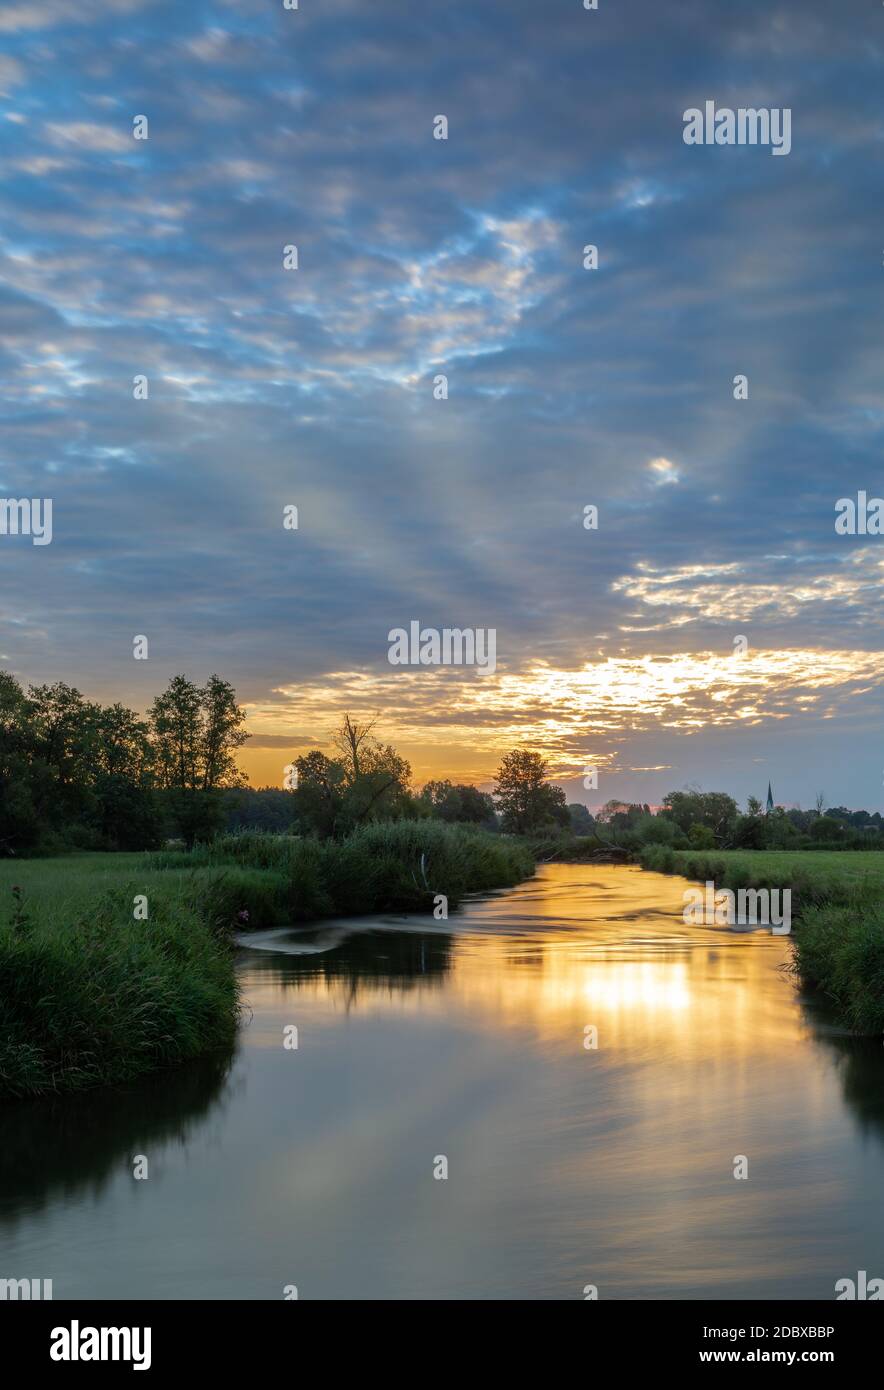 Sunrise at Paar river in Bavaria, Germany Stock Photo